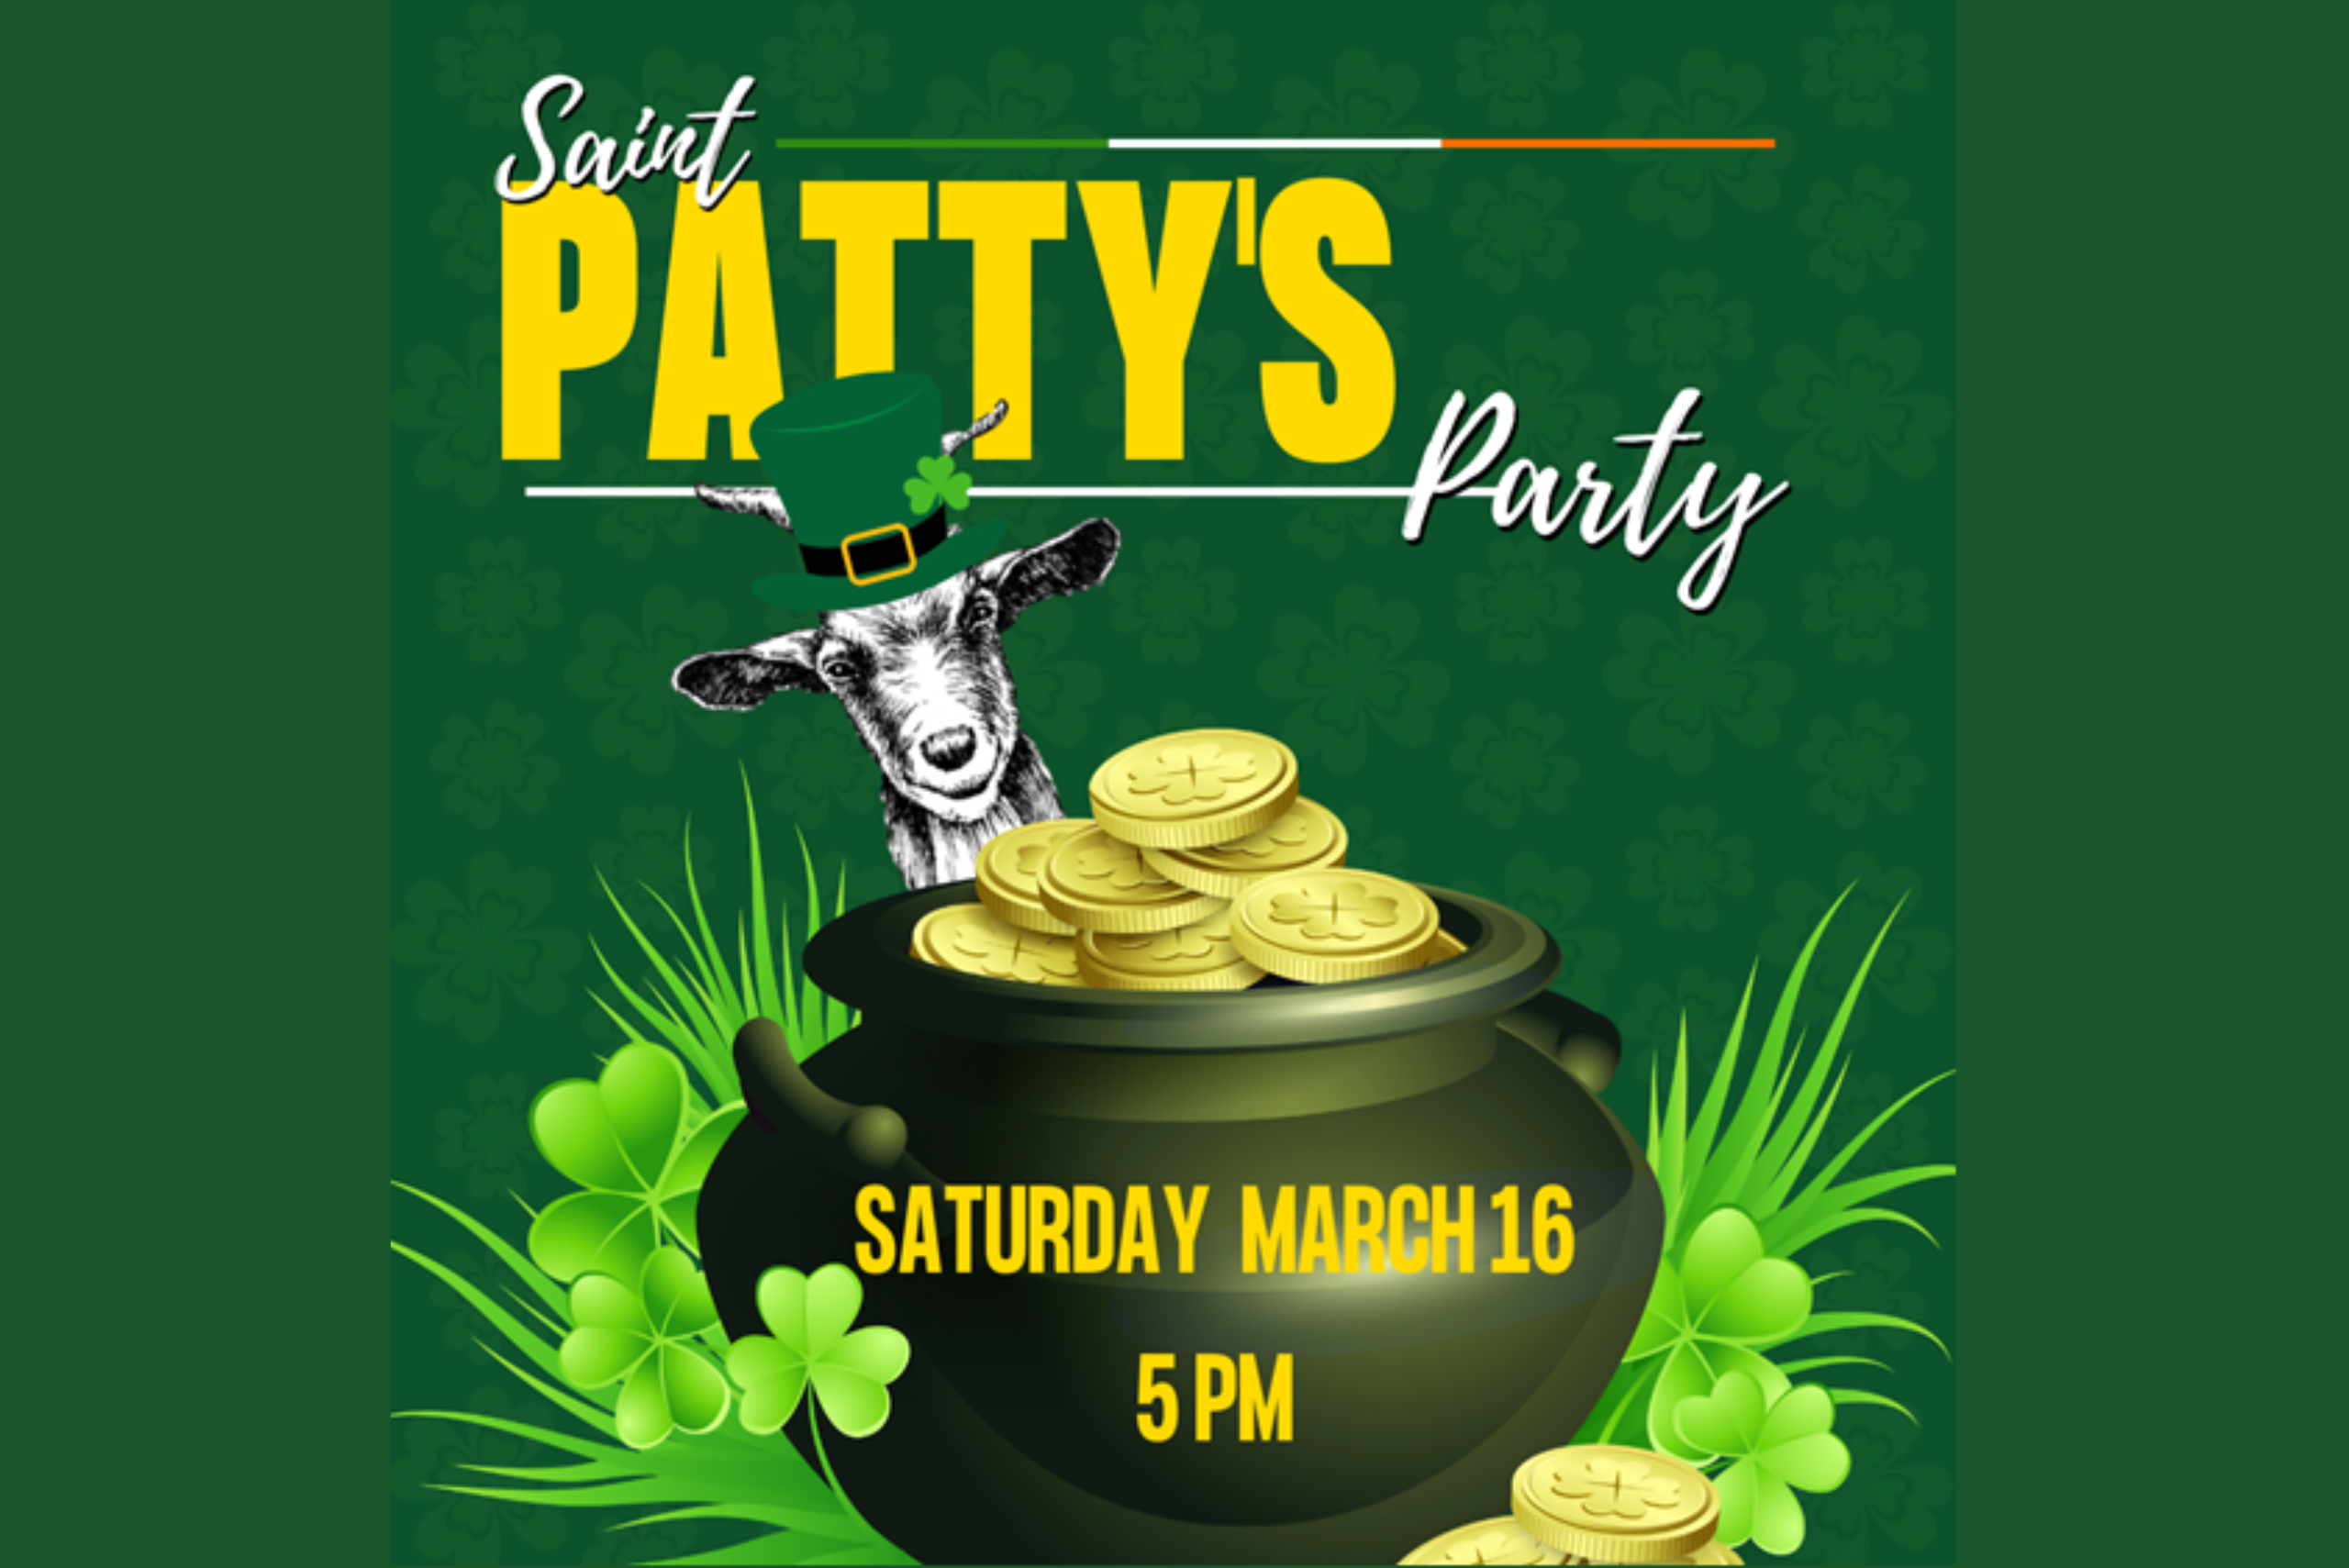 St. Patty's Party at Goat Island Bottle Shop